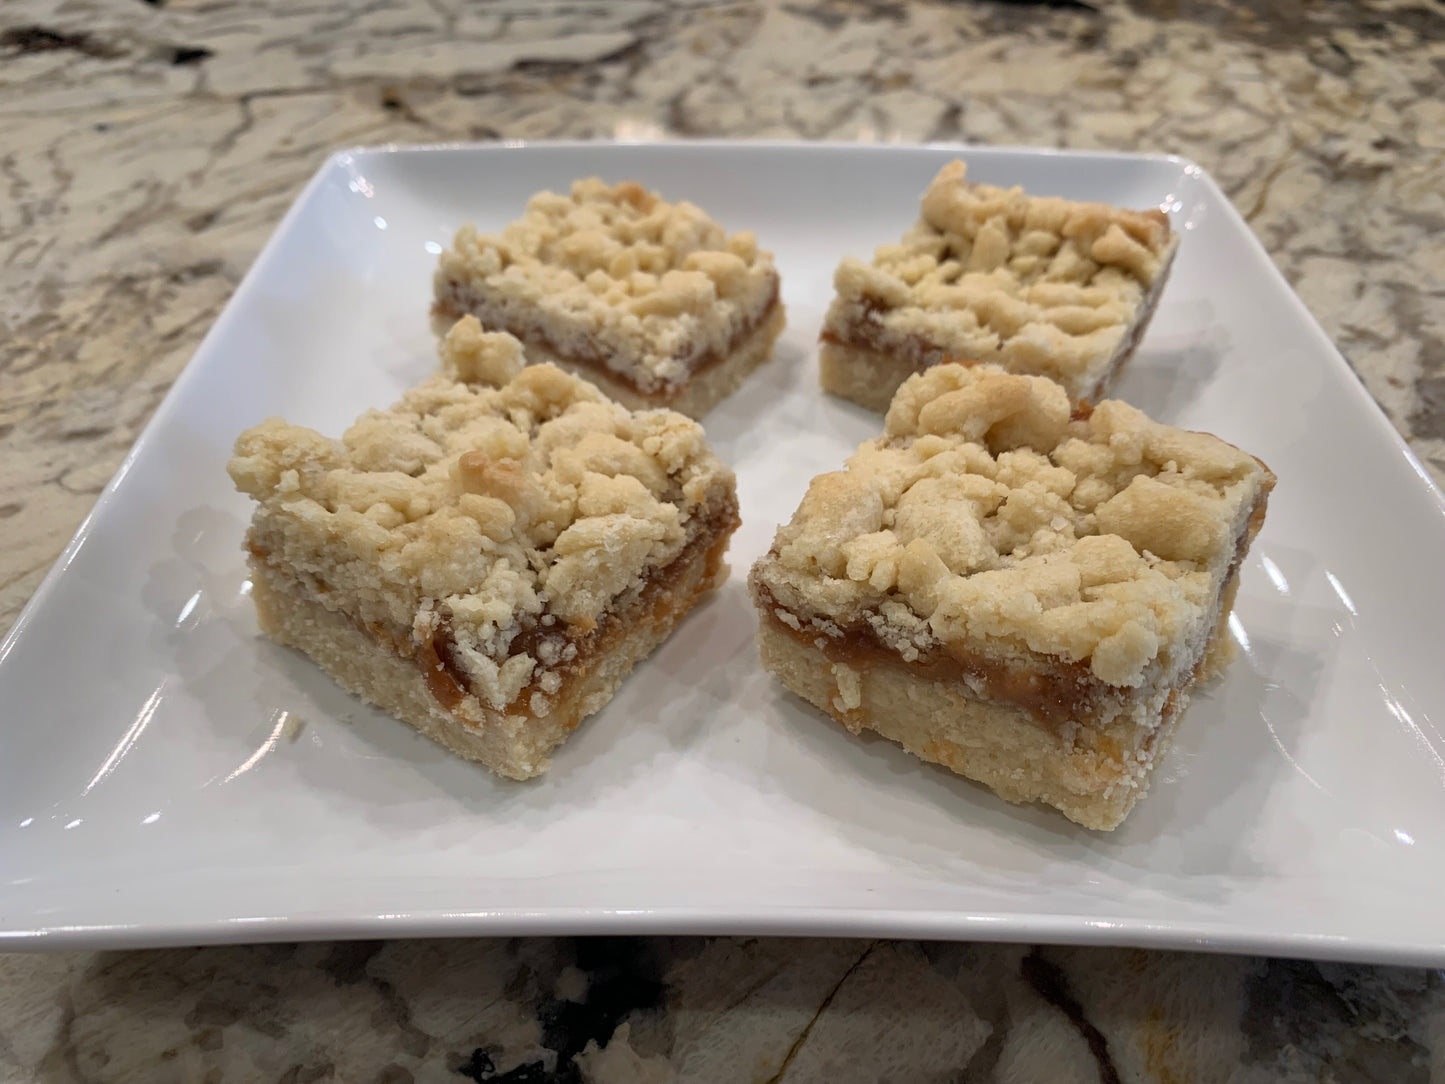 Salted Caramel Butter Bars (2 dozen) | Order by Wednesday 12/6, Pick Up on Friday 12/8 3:30-5:30